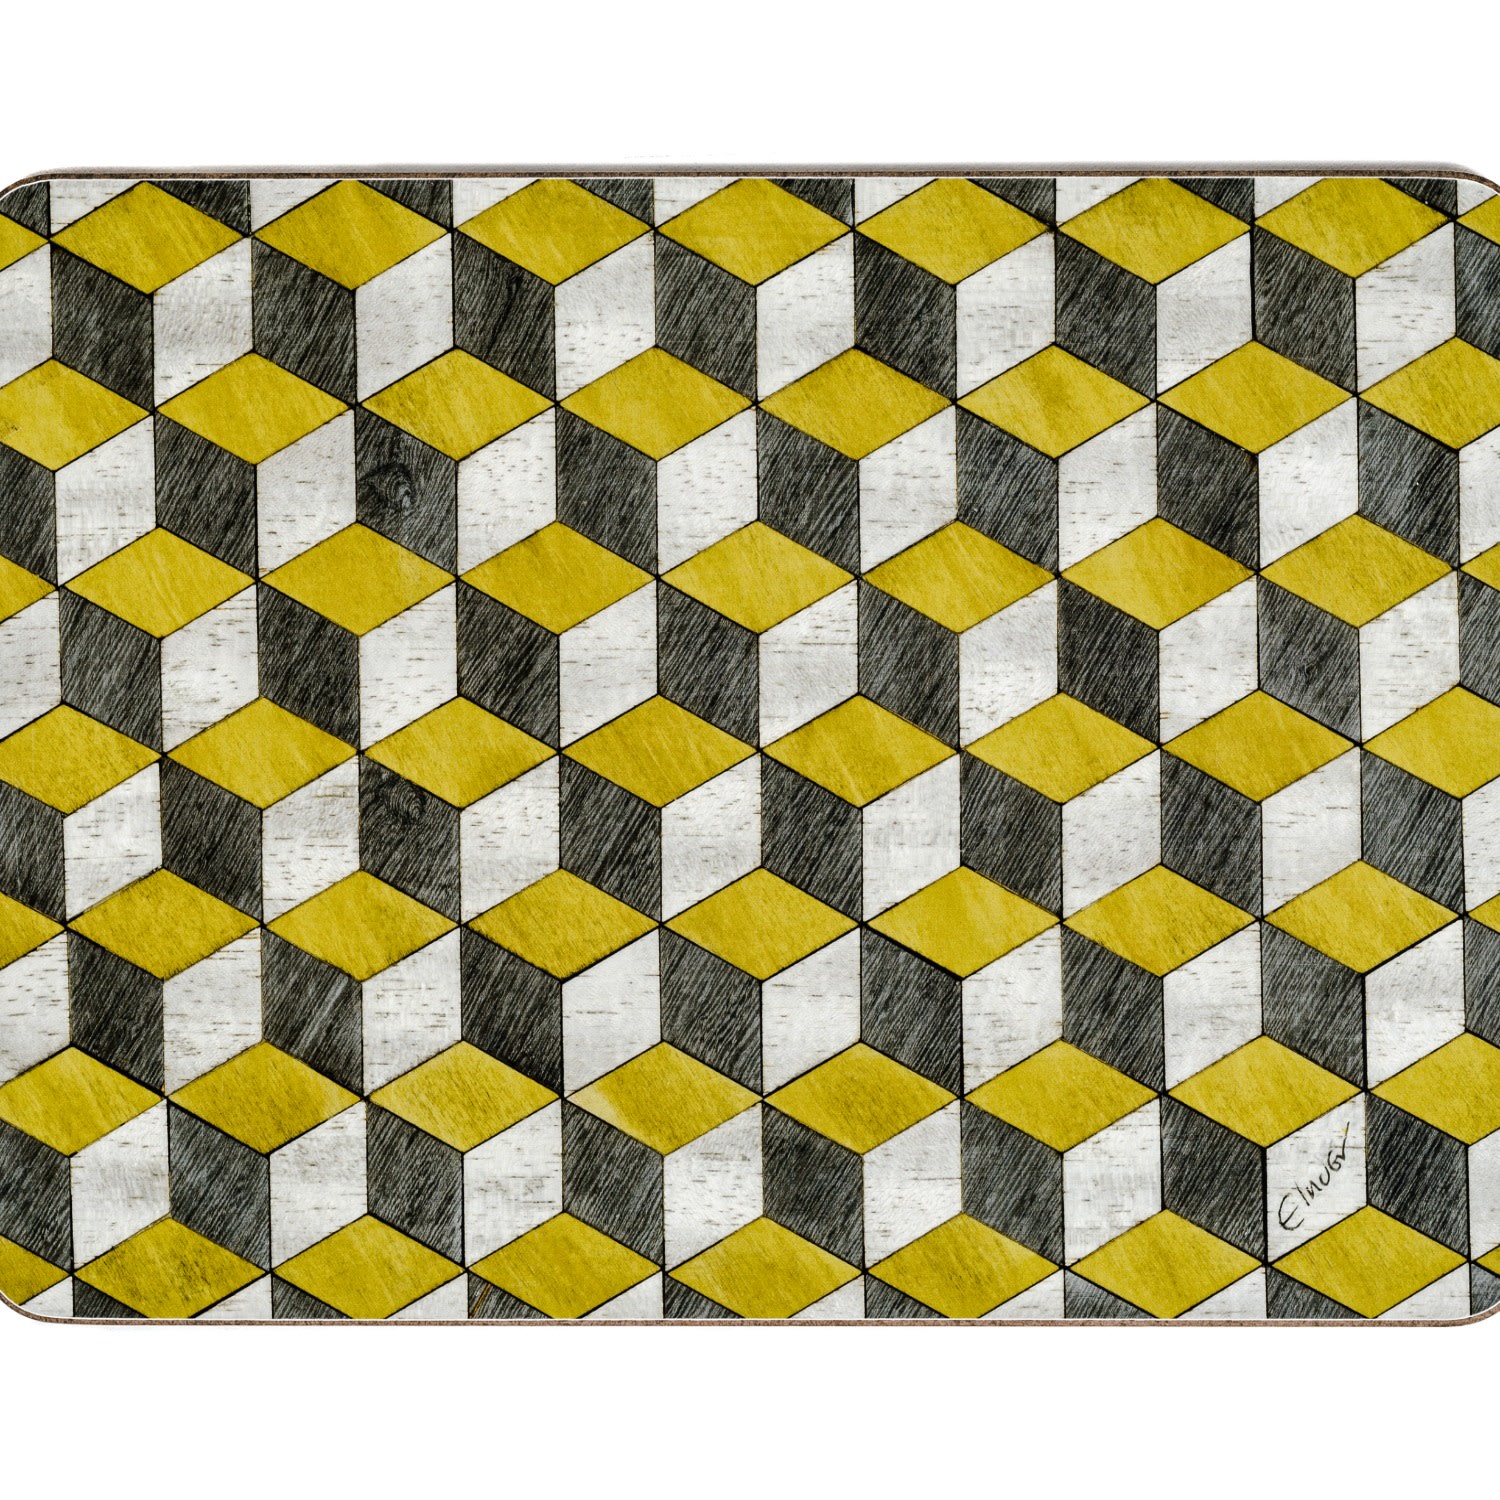 Grey / Yellow / Orange Six Placemats In Mid Century Modern Yellow And Greys With Heat Resistant Melamine. Tied With Ribbon For Gifting. Please Measure Plate Before Purchase E. Inder Designs